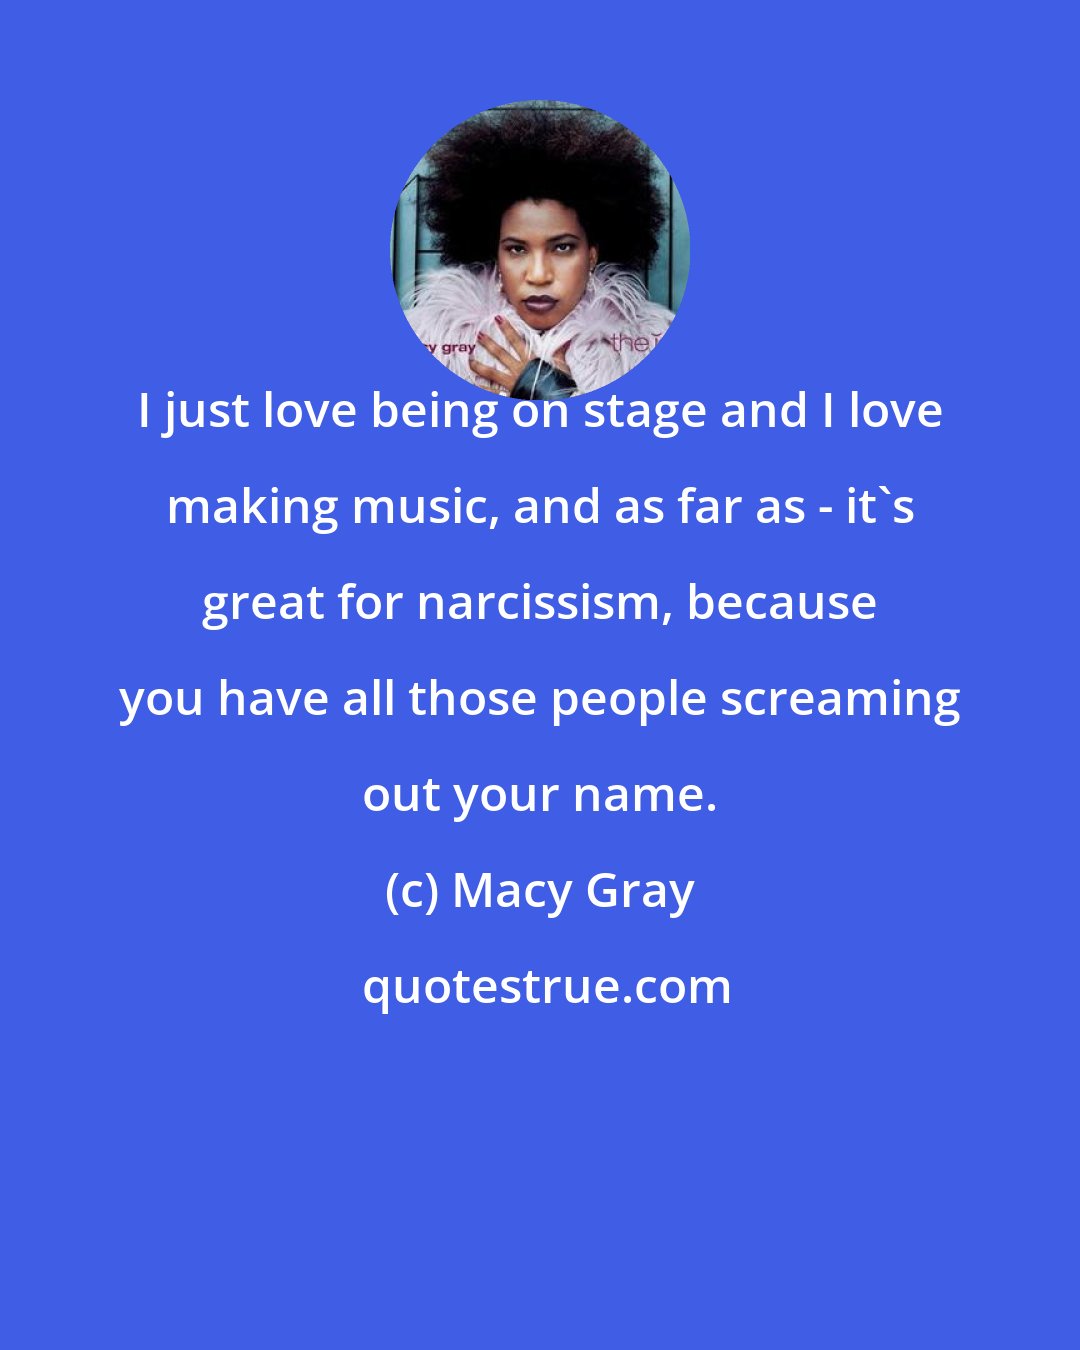 Macy Gray: I just love being on stage and I love making music, and as far as - it's great for narcissism, because you have all those people screaming out your name.